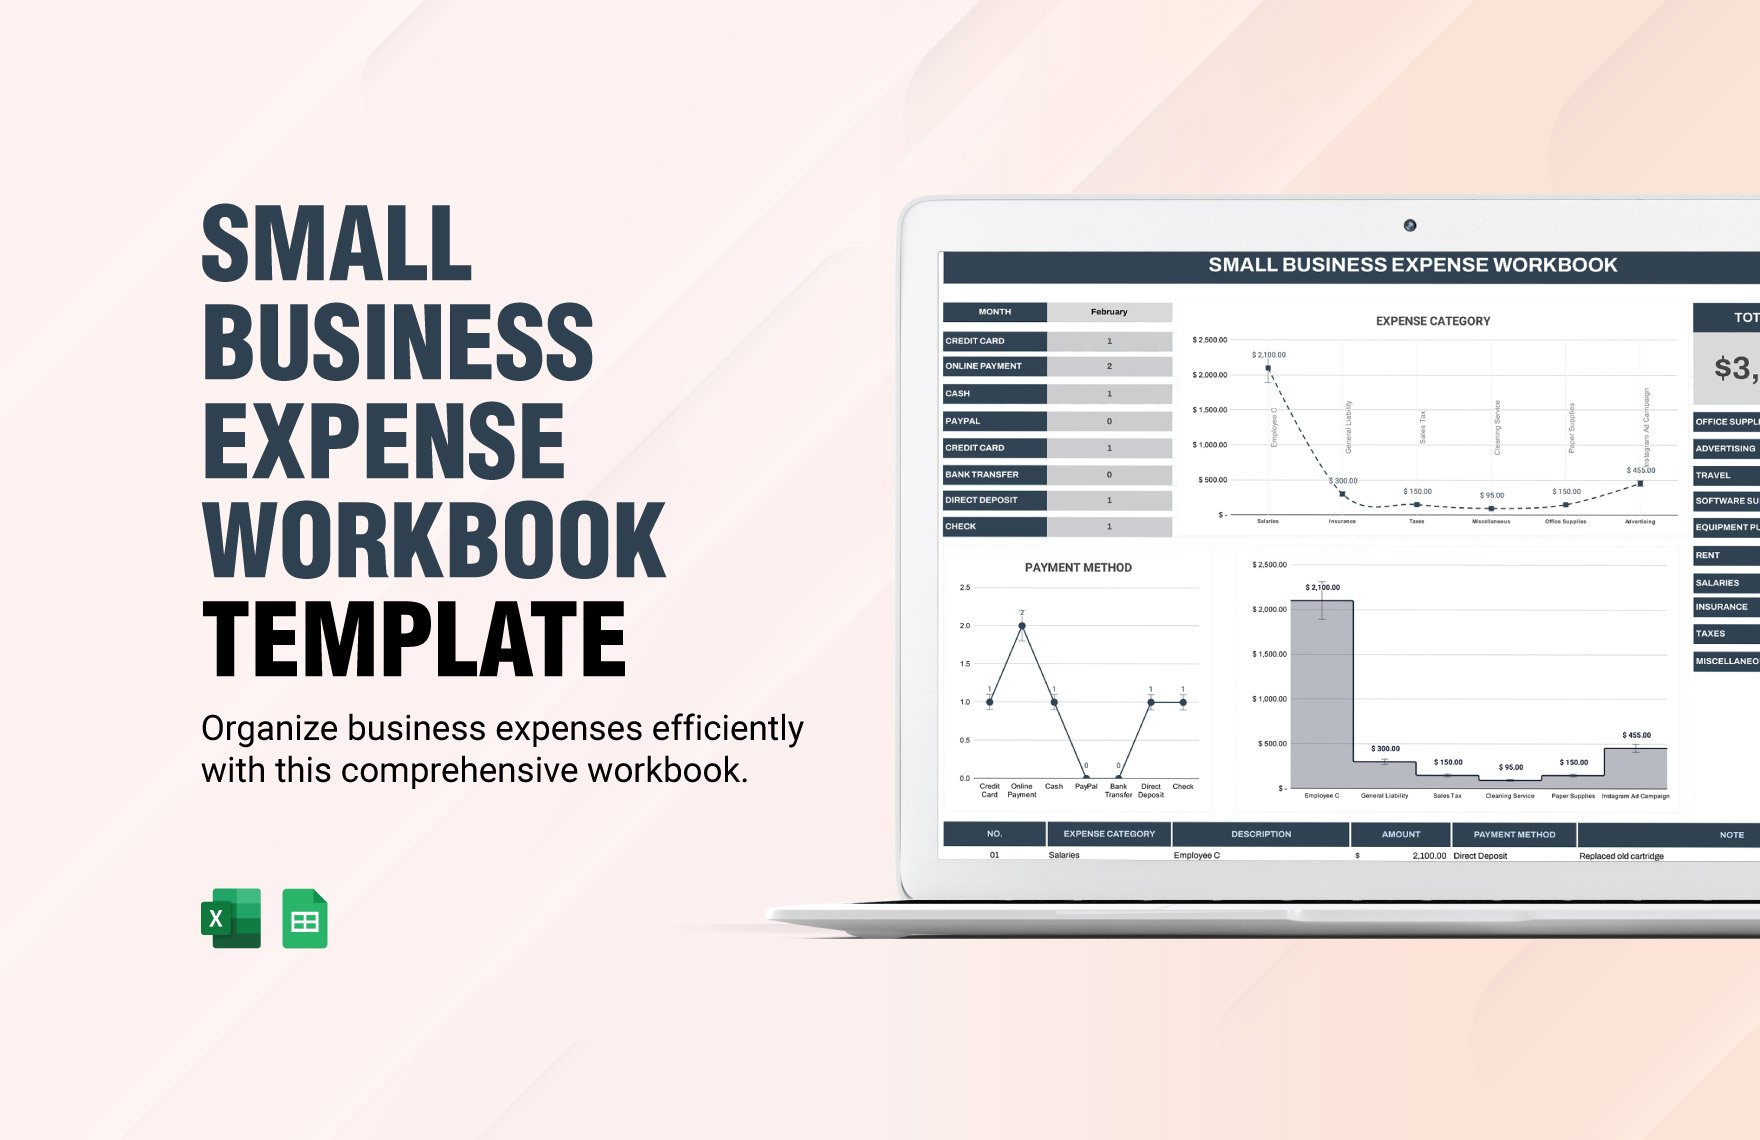 Small Business Expense Workbook Template